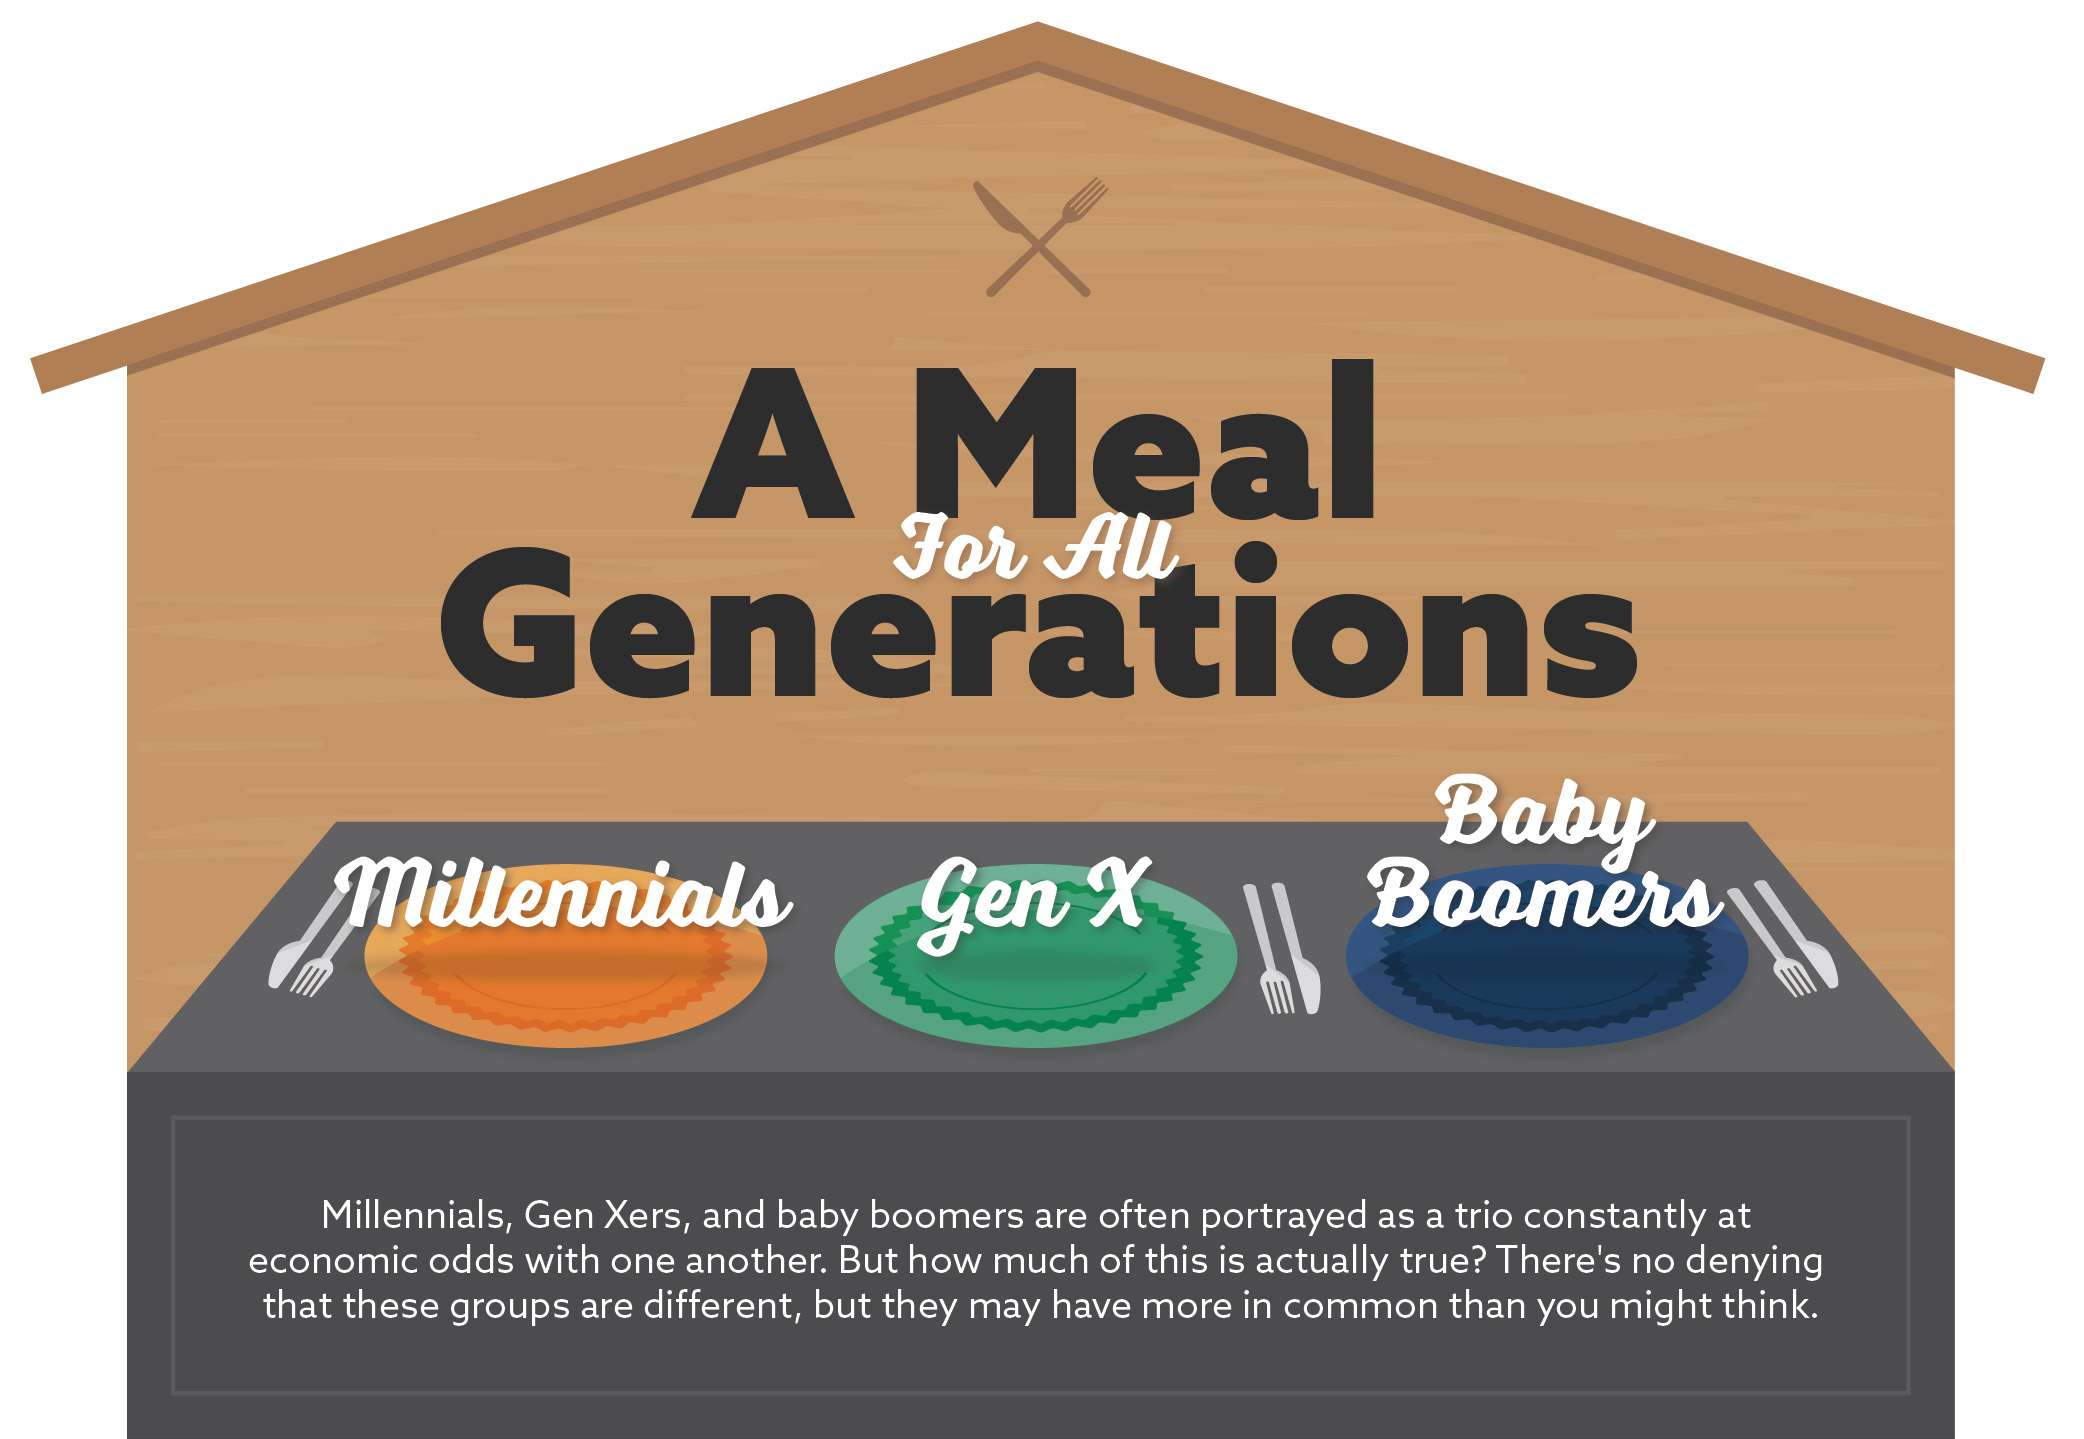 A Meal For All Generations. Millennials, Gen Xers, and baby boomers are often portrayed as a trio constantly at economic odds with one another. But how much of this is actually true? There's no denying that these groups are different, but they may have more in common than you might think.